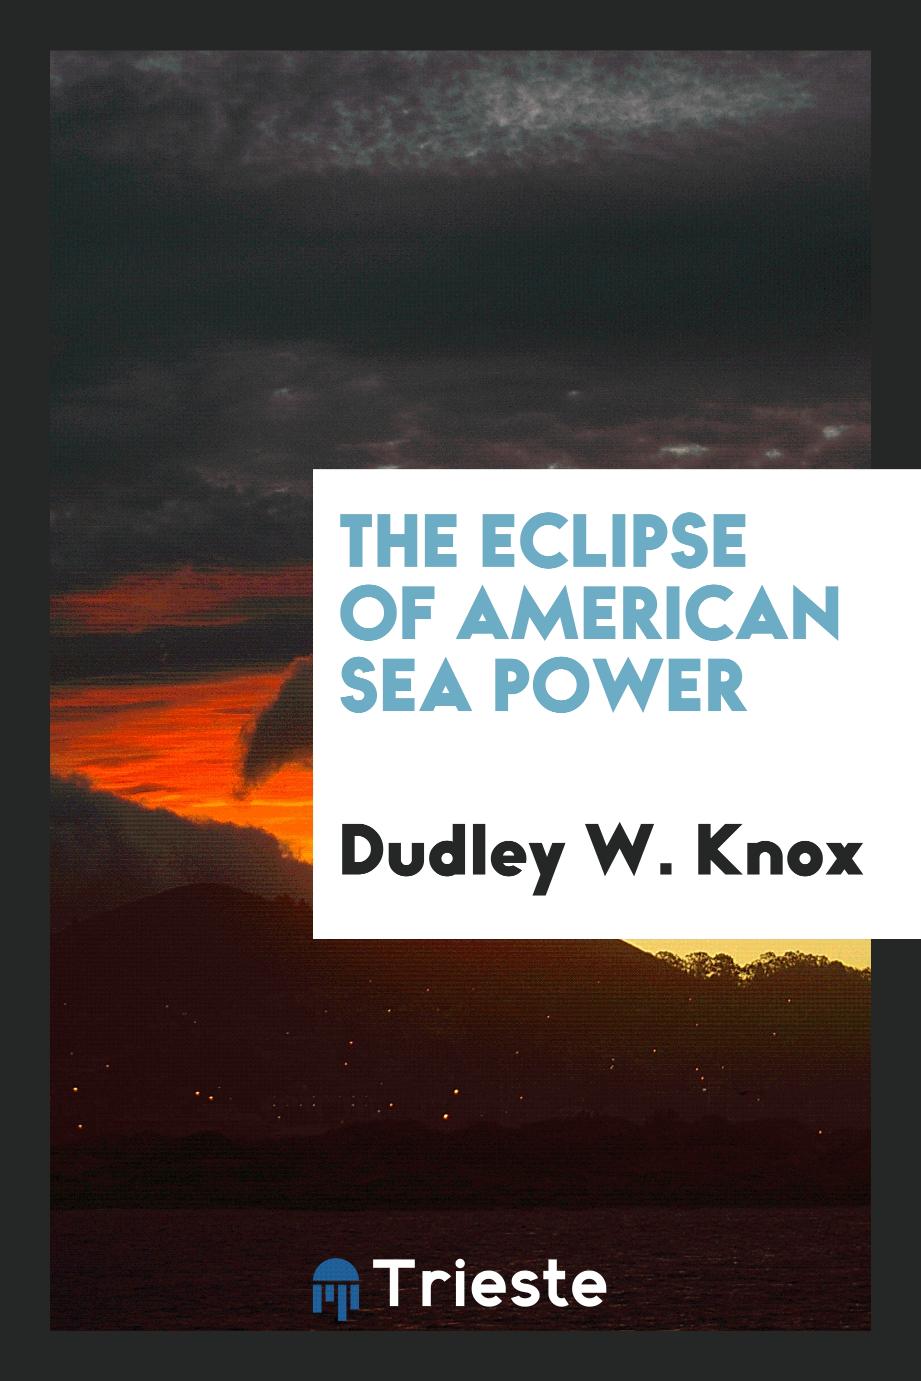 The Eclipse of American Sea Power